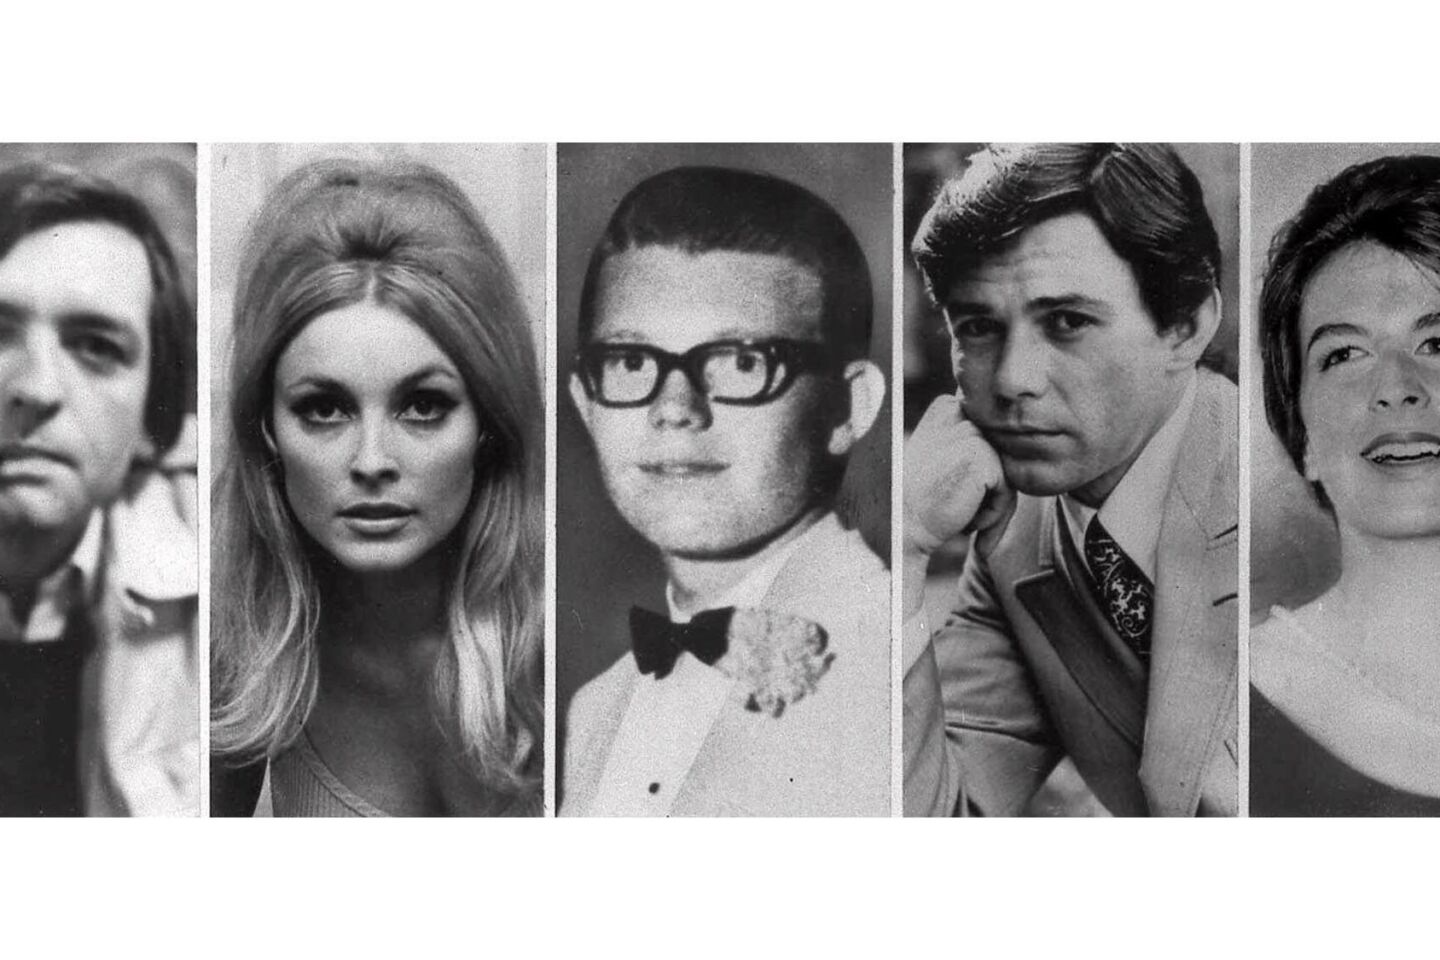 The five victims slain the night of Aug. 9, 1969 at the Benedict Canyon Estate of Roman Polanski. From left, Voityck Frykowski, Sharon Tate, Stephen Parent, Jay Sebring, and Abigail Folger. The next night, it happened again. Rosemary and Leno LaBianca, a wealthy couple who lived across town, were stabbed to death in their home.